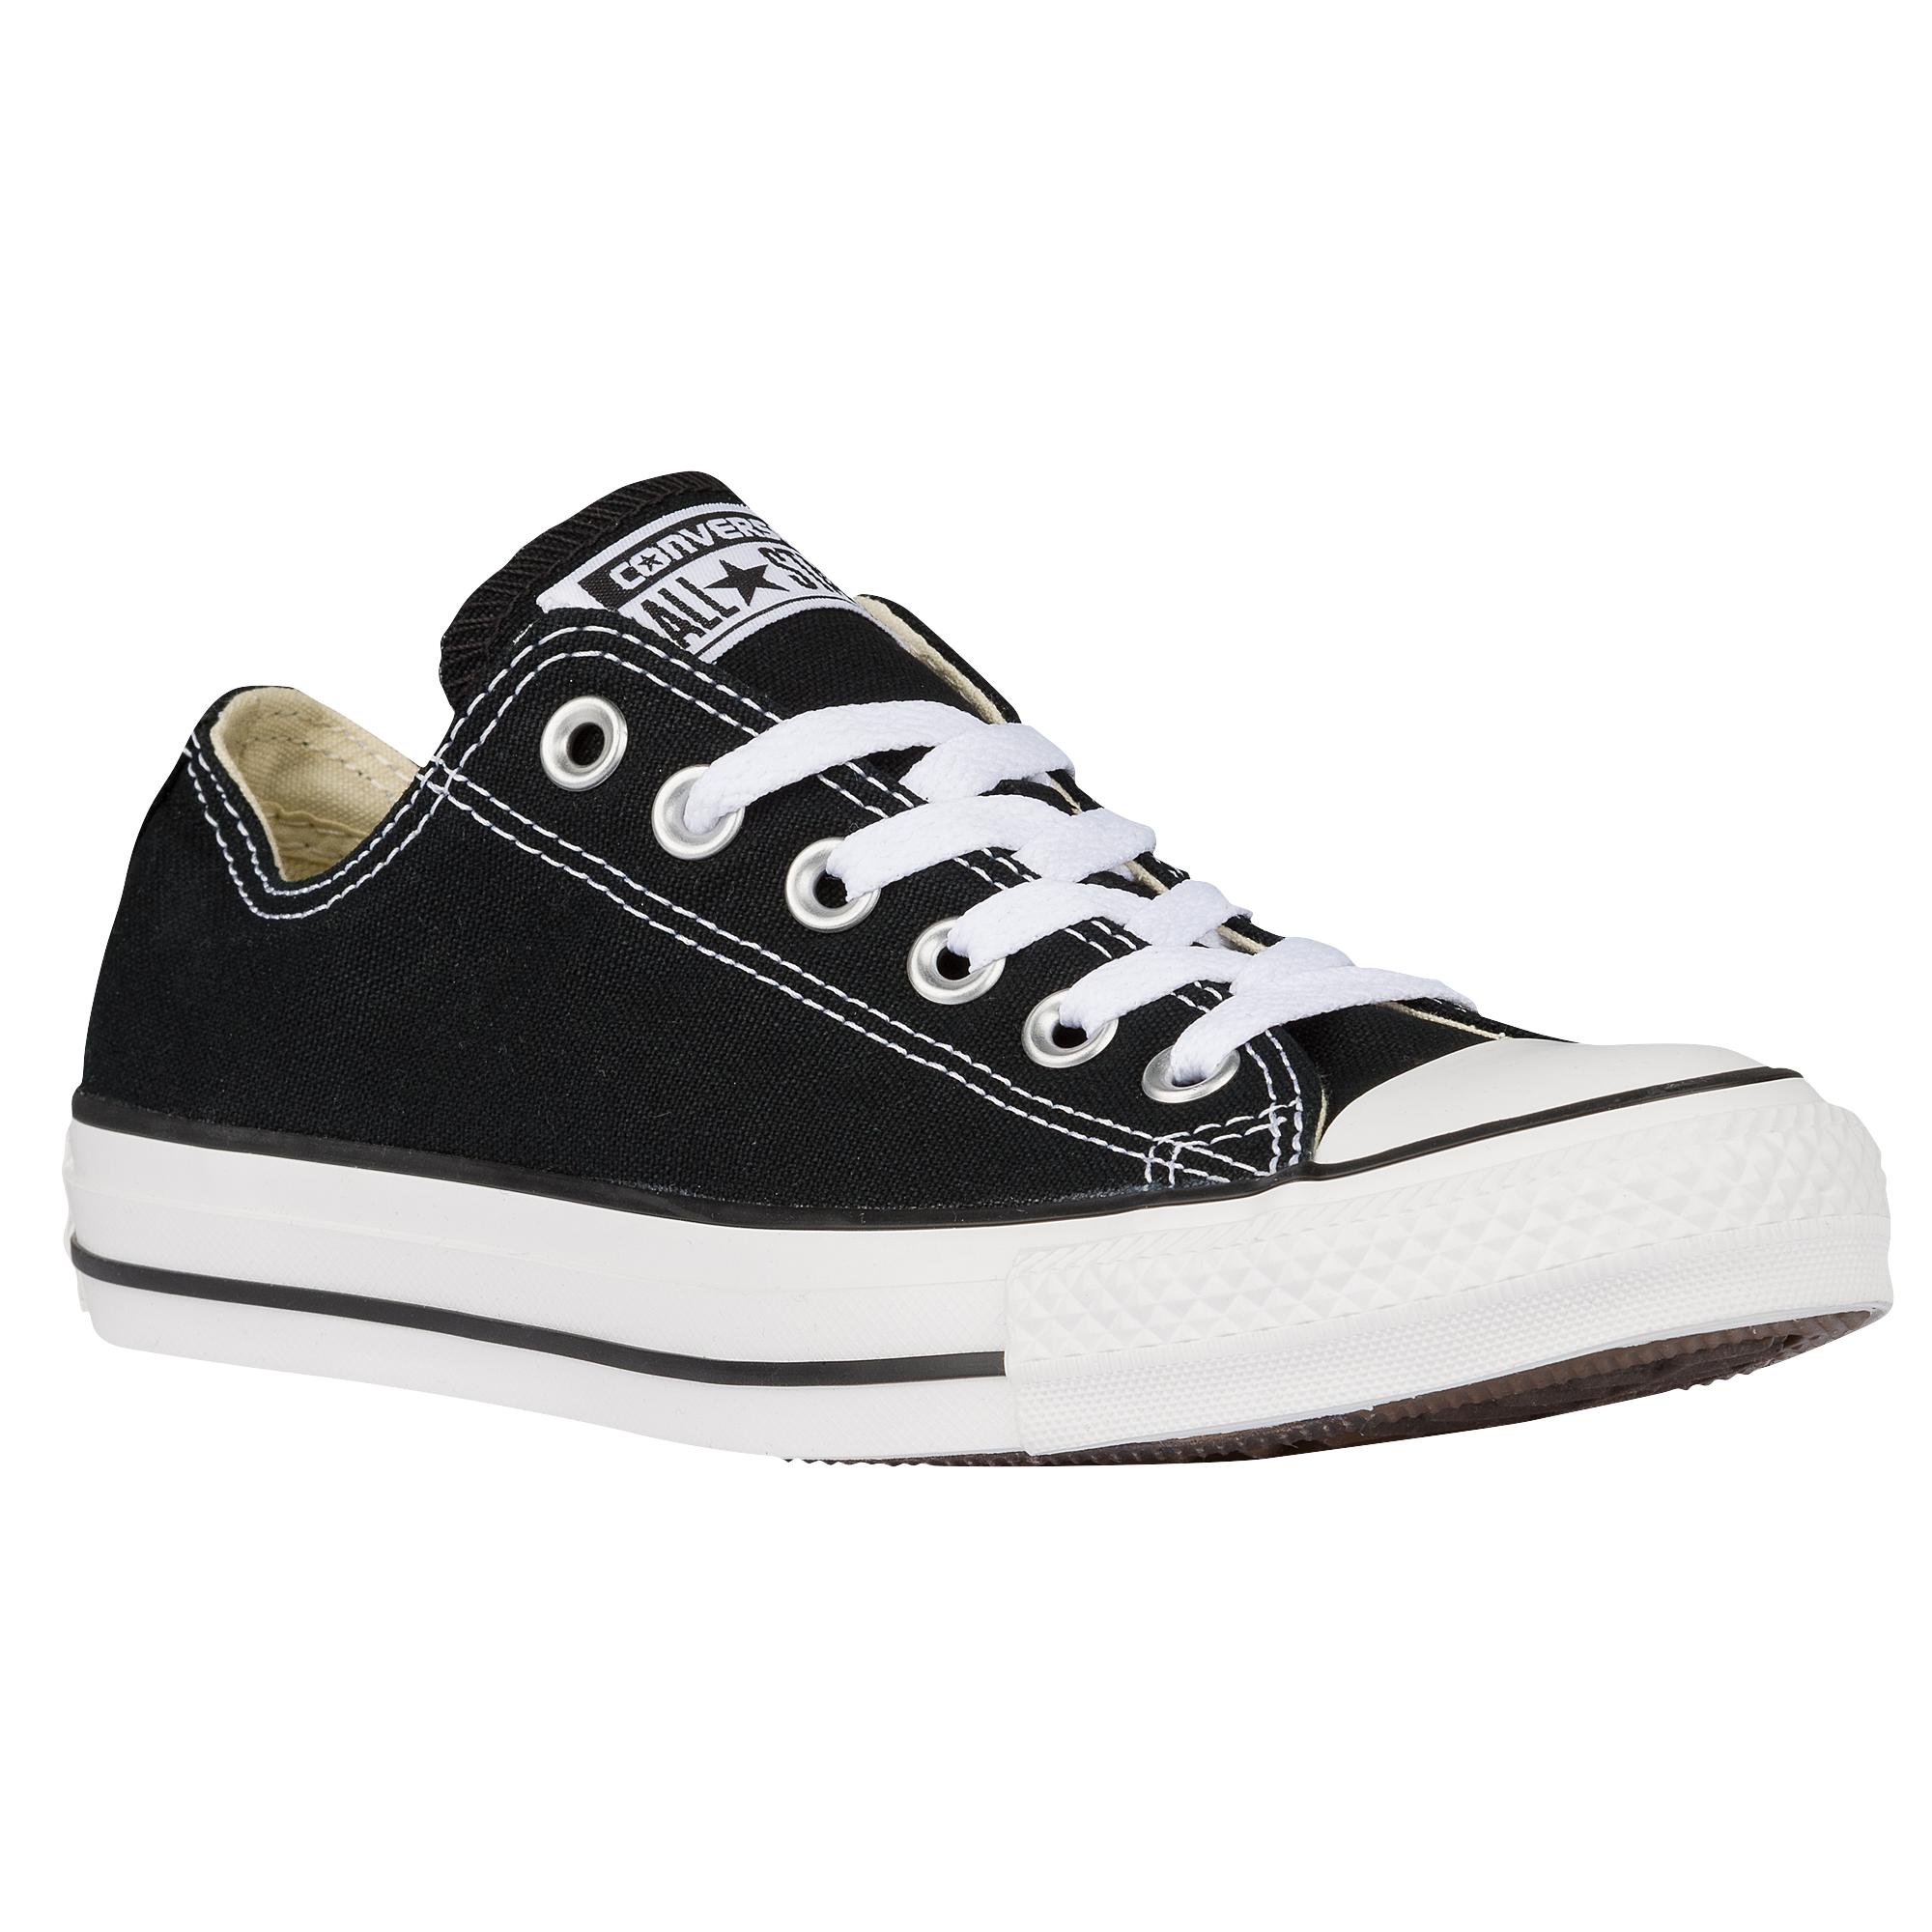 Converse Canvas All Star Ox - Basketball Shoes in Black/White (Black ...